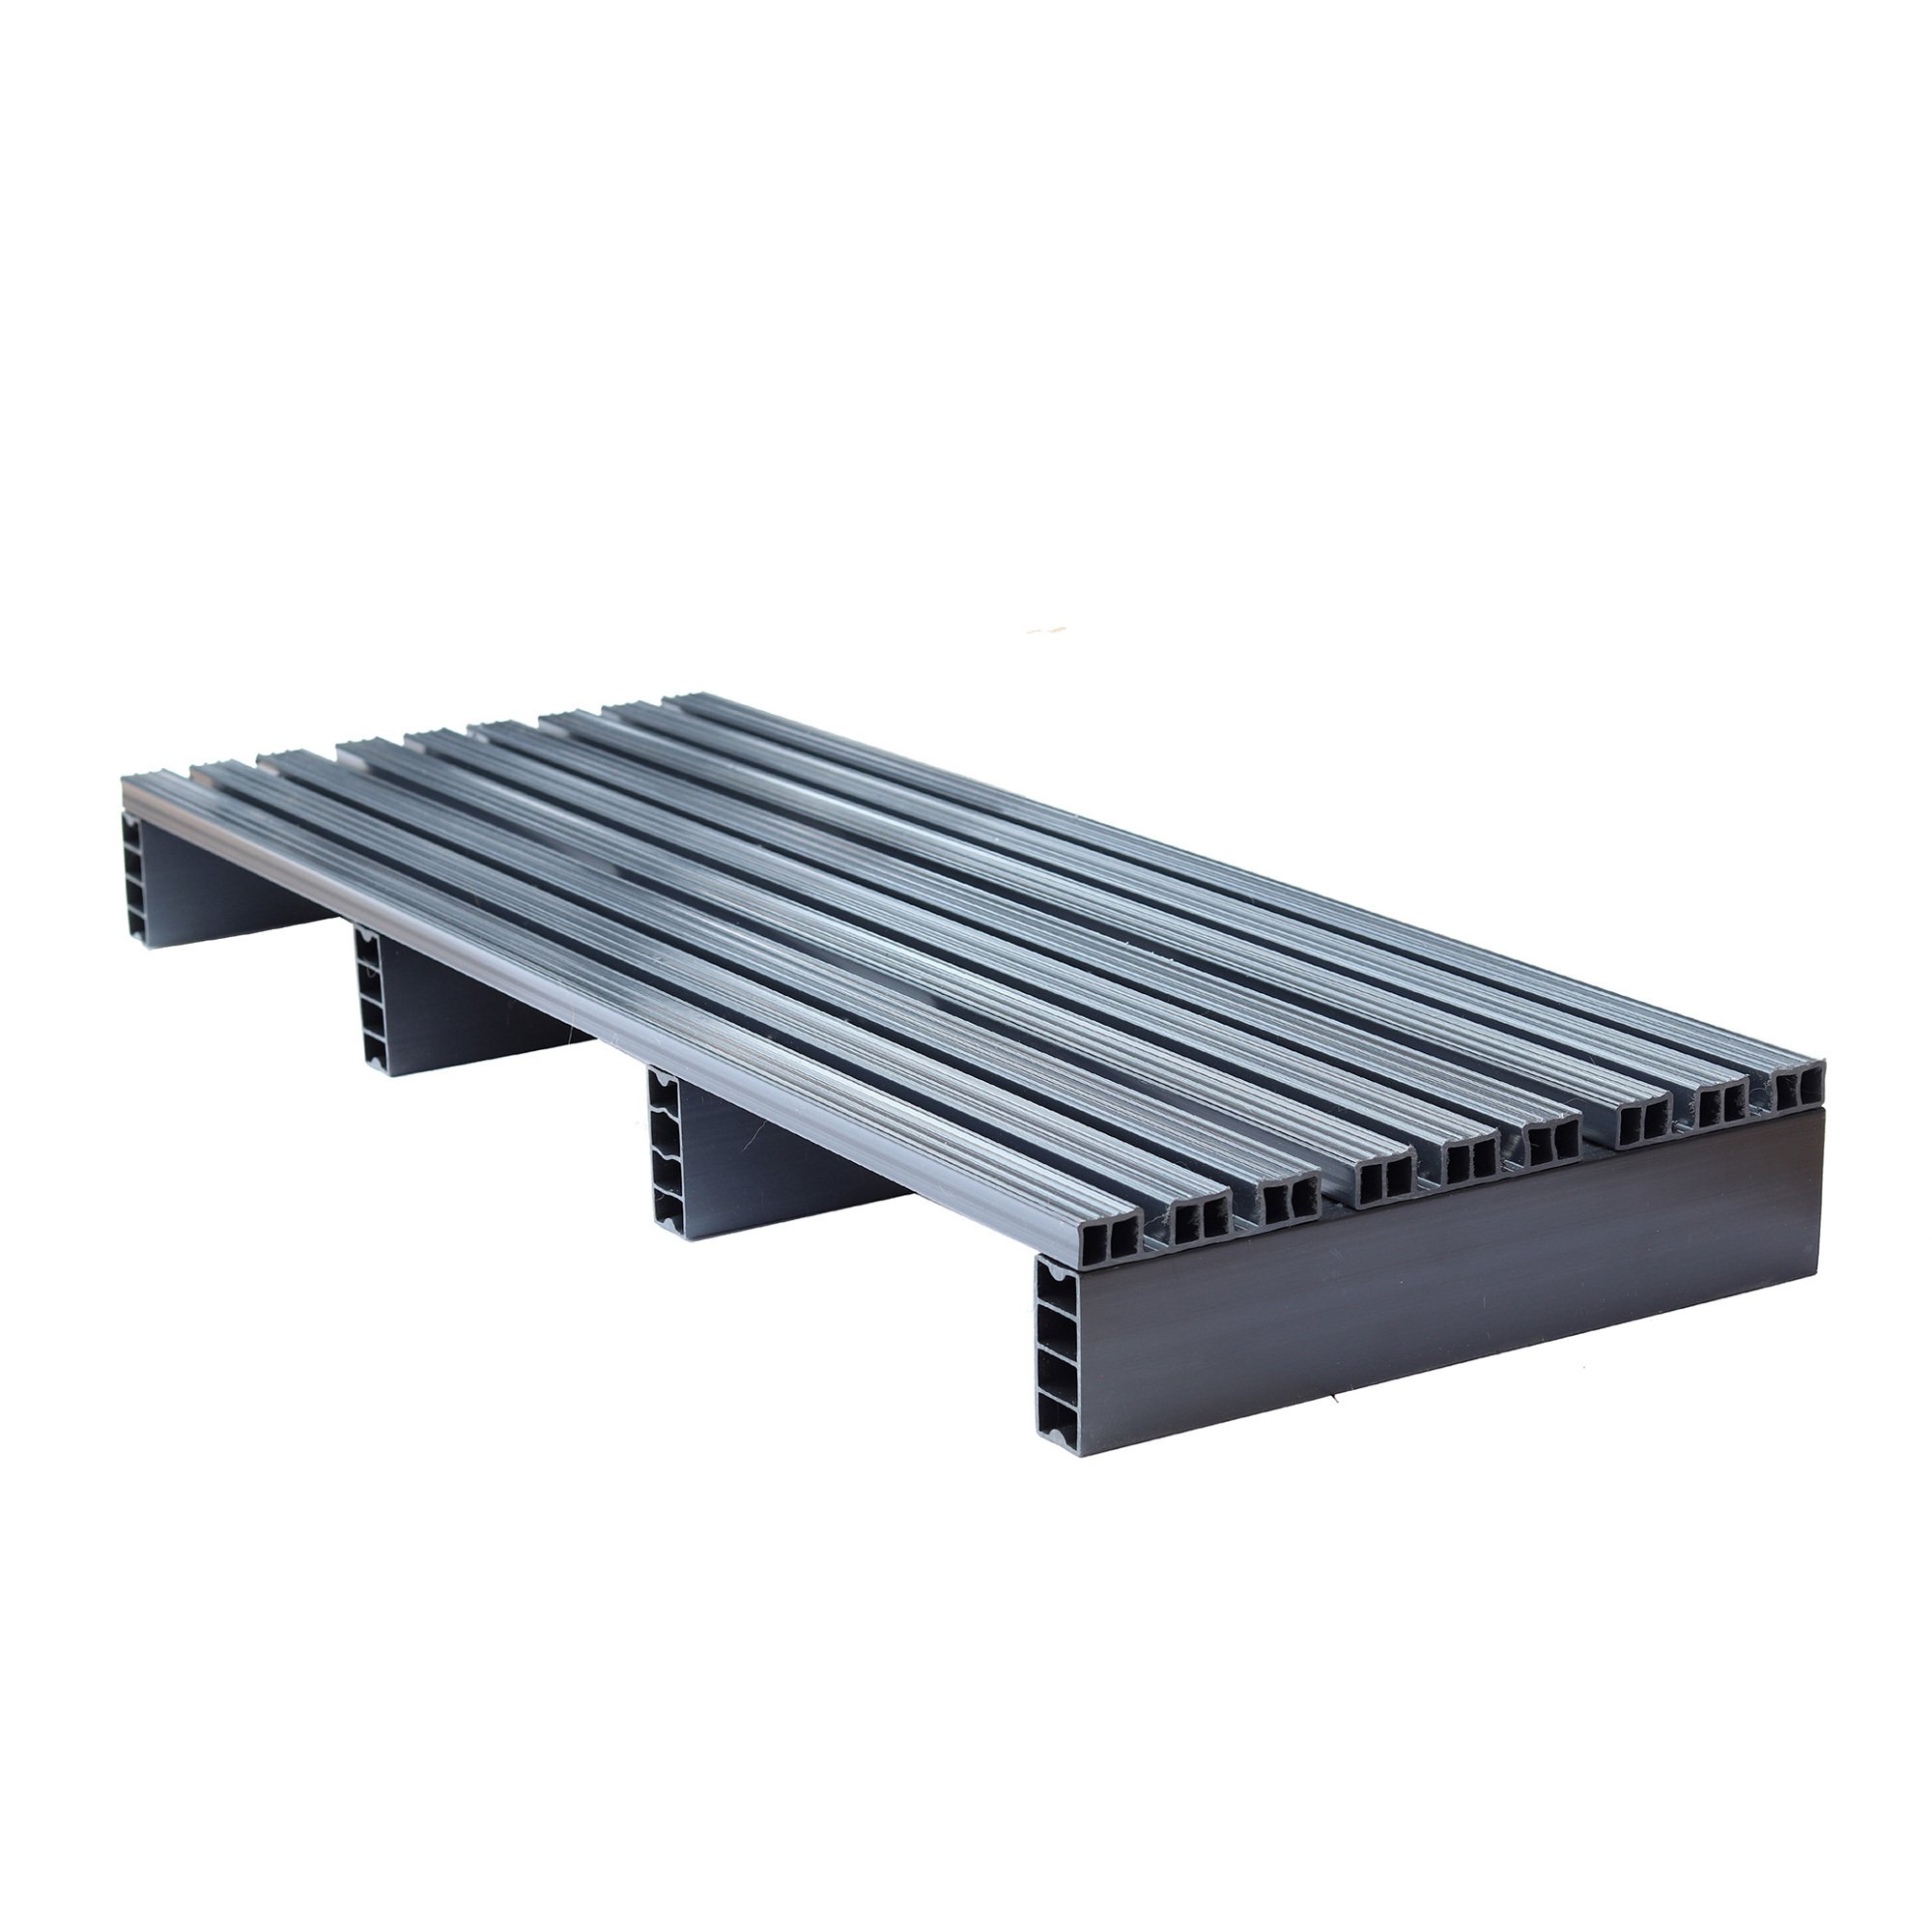 PLASTIC PALLETS & SKIDS, Yellow, Uniformed supported weight Cap. (lbs.)  Floor (Static) / Floor (Dynamic) / Unsupported Pallet Rack: 6600 / 2200 /  0, Fork Opening W x H: 10-1/4 x 3-3/4